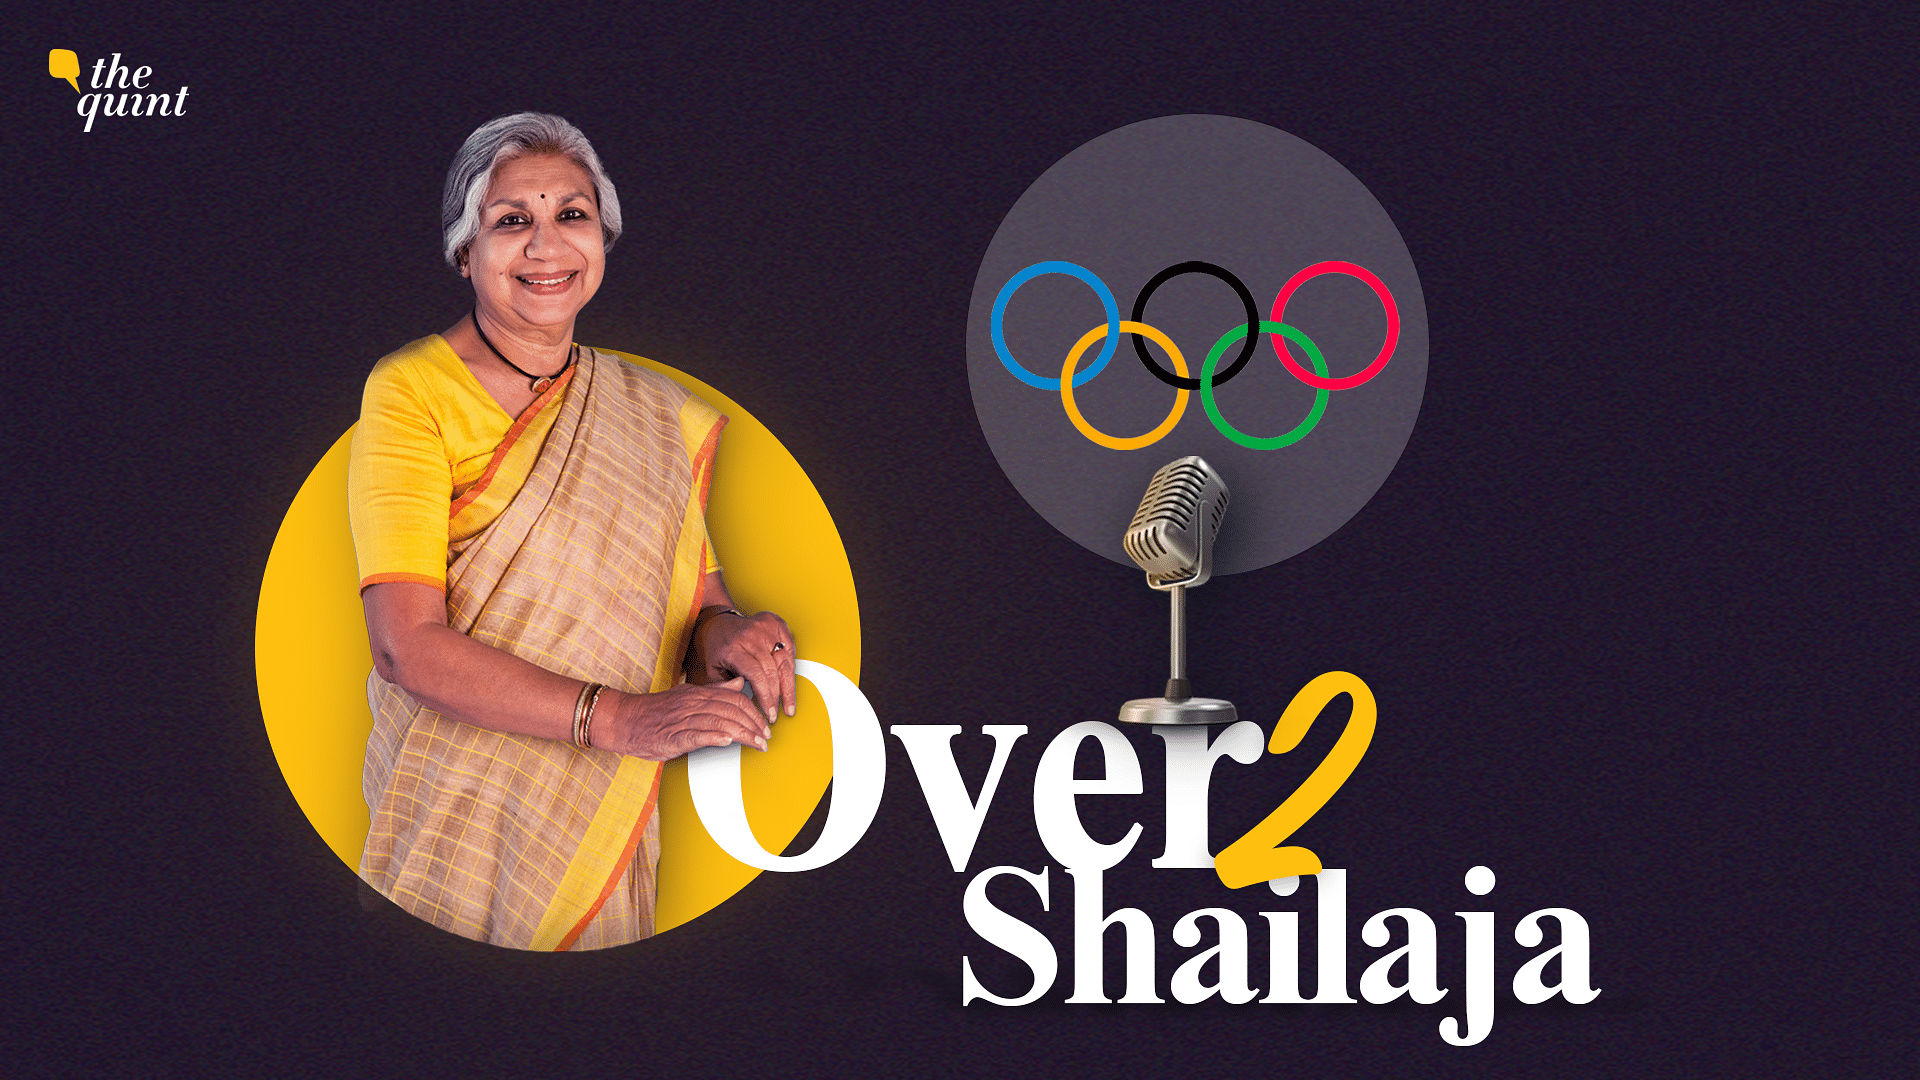 <div class="paragraphs"><p>Tune in to the third episode of <strong>The Quint</strong>'s podcast series, Over2Shailaja, with your host Shailaja Chandra!</p></div>